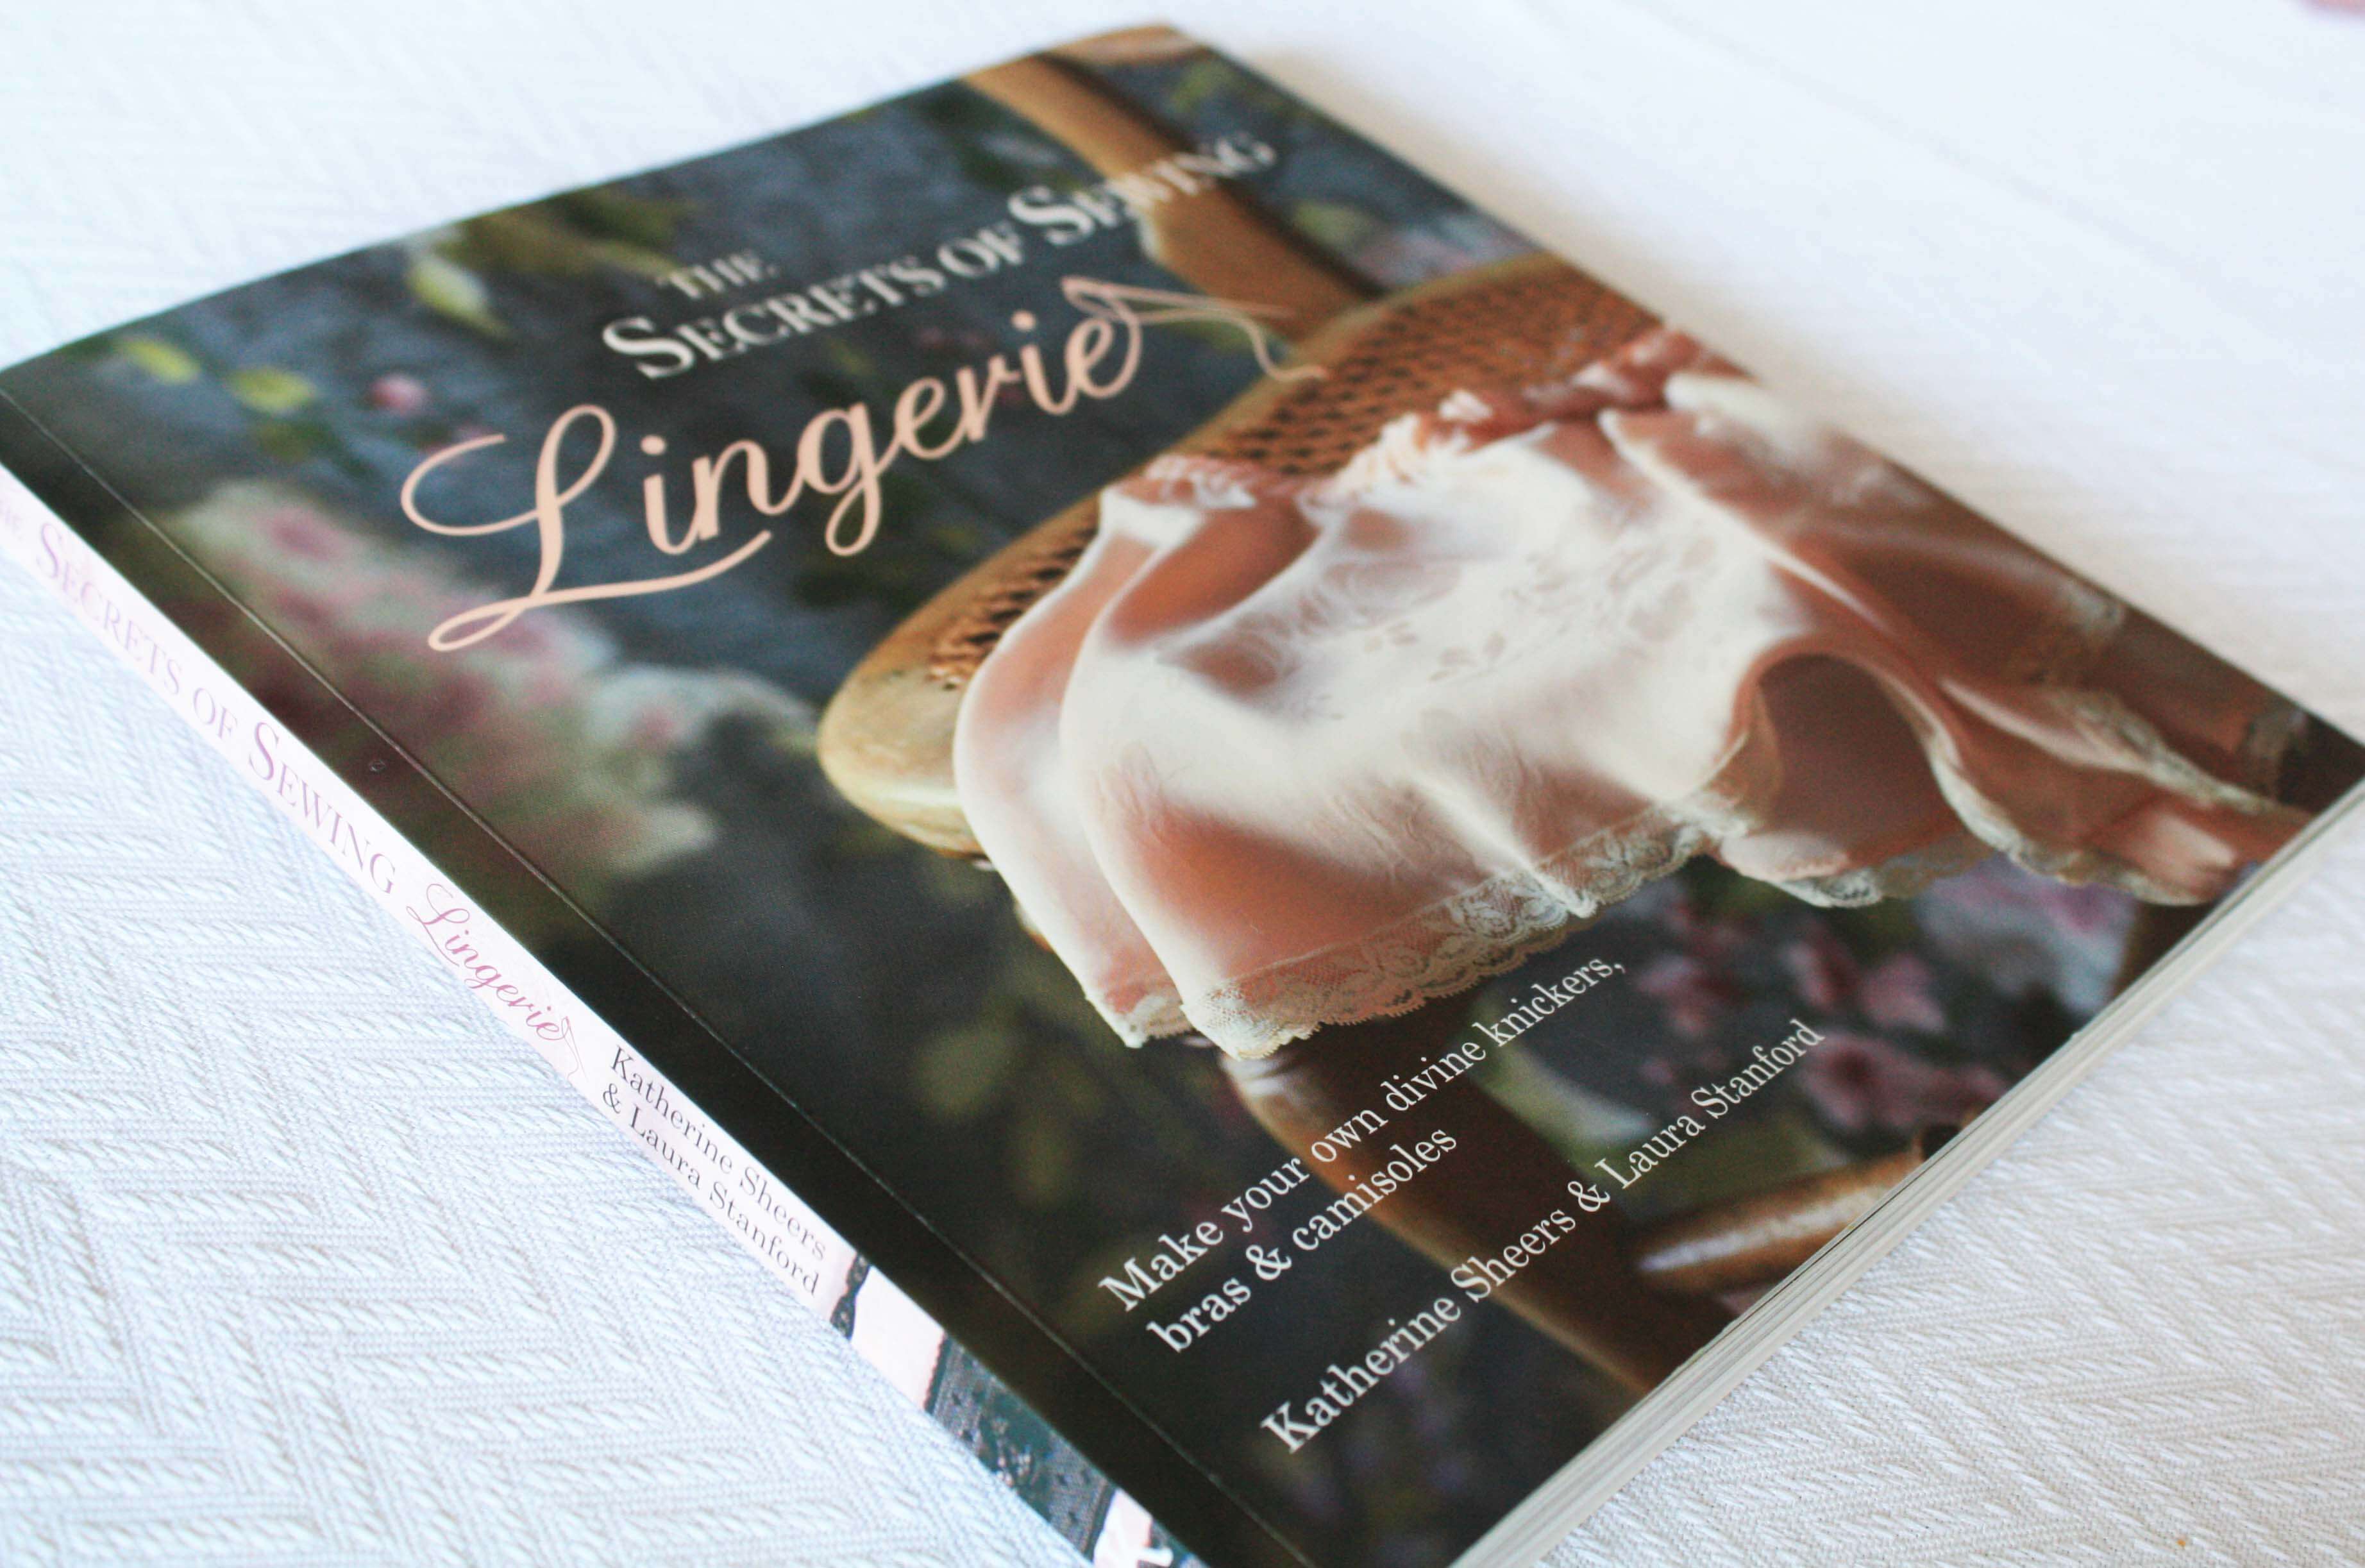 Book review: The Secrets of Sewing Lingerie < with my hands - Dream